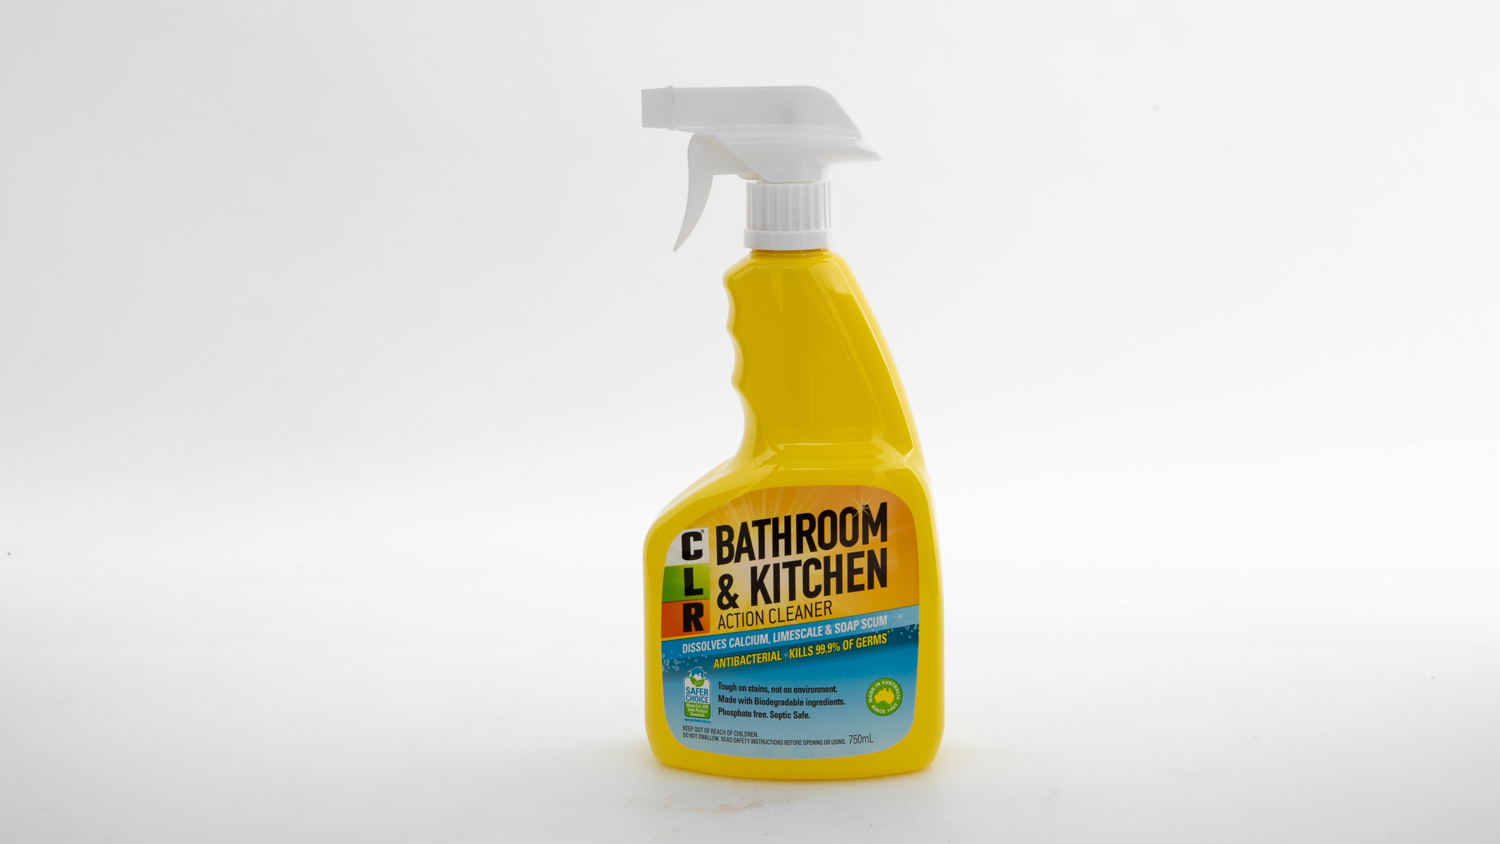 CLR Bathroom & Kitchen Action Cleaner carousel image